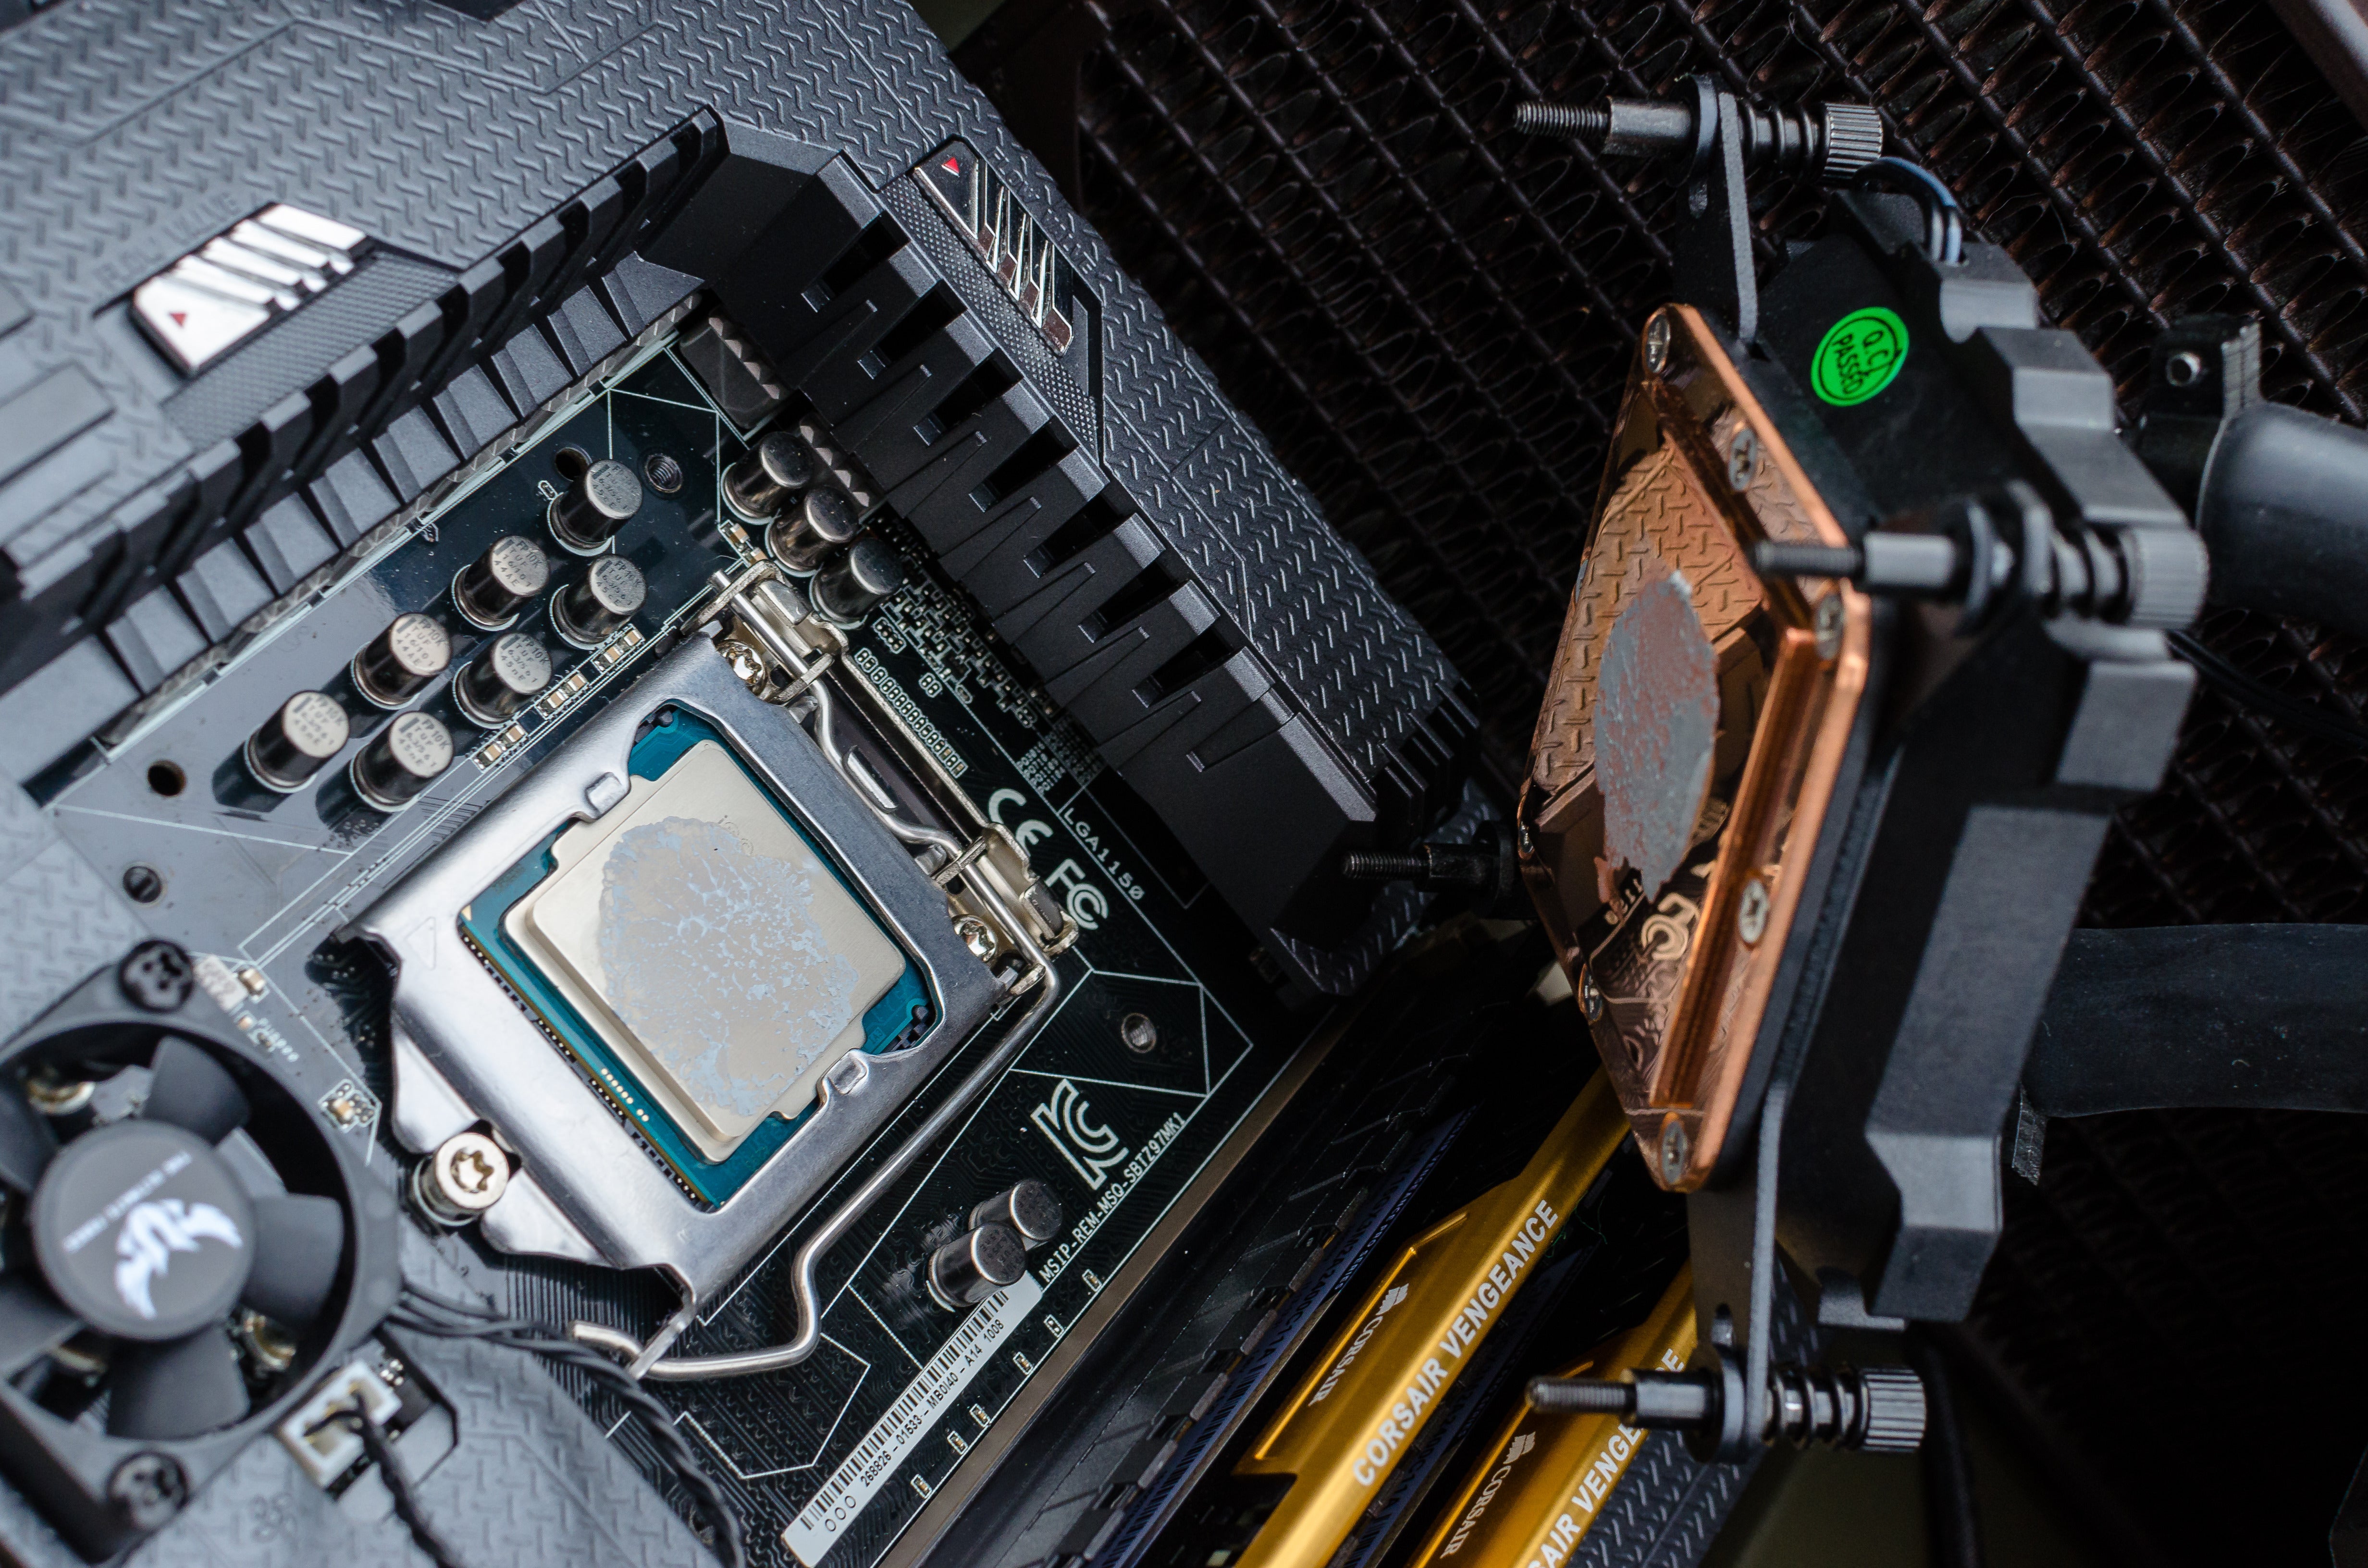 How to replace or install a motherboard in your computer | PCWorld